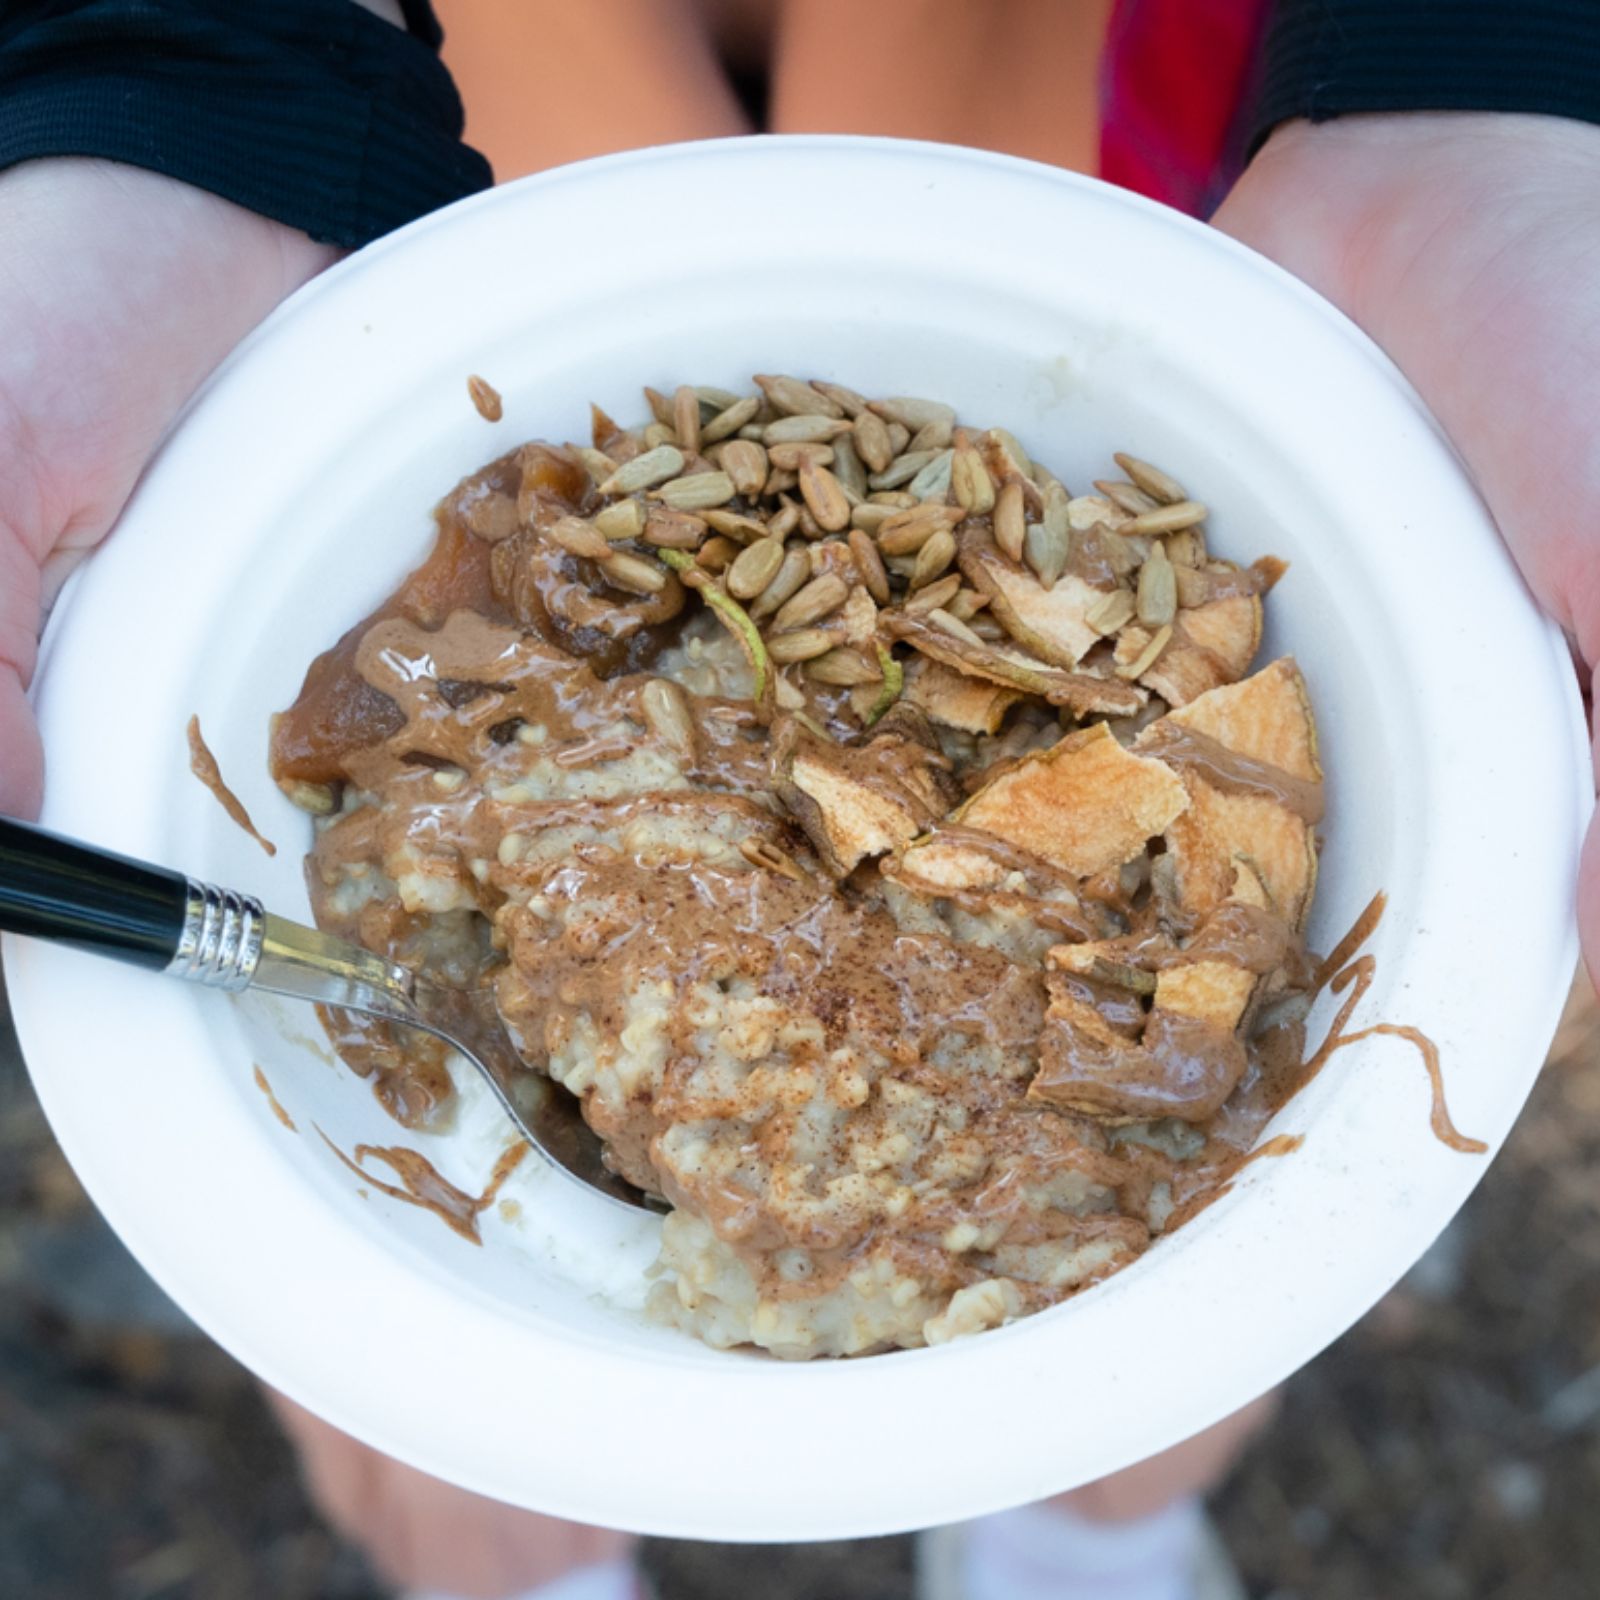 Camping Oatmeal with nut butter, dried apples, seeds, and creamy oatmeal. 